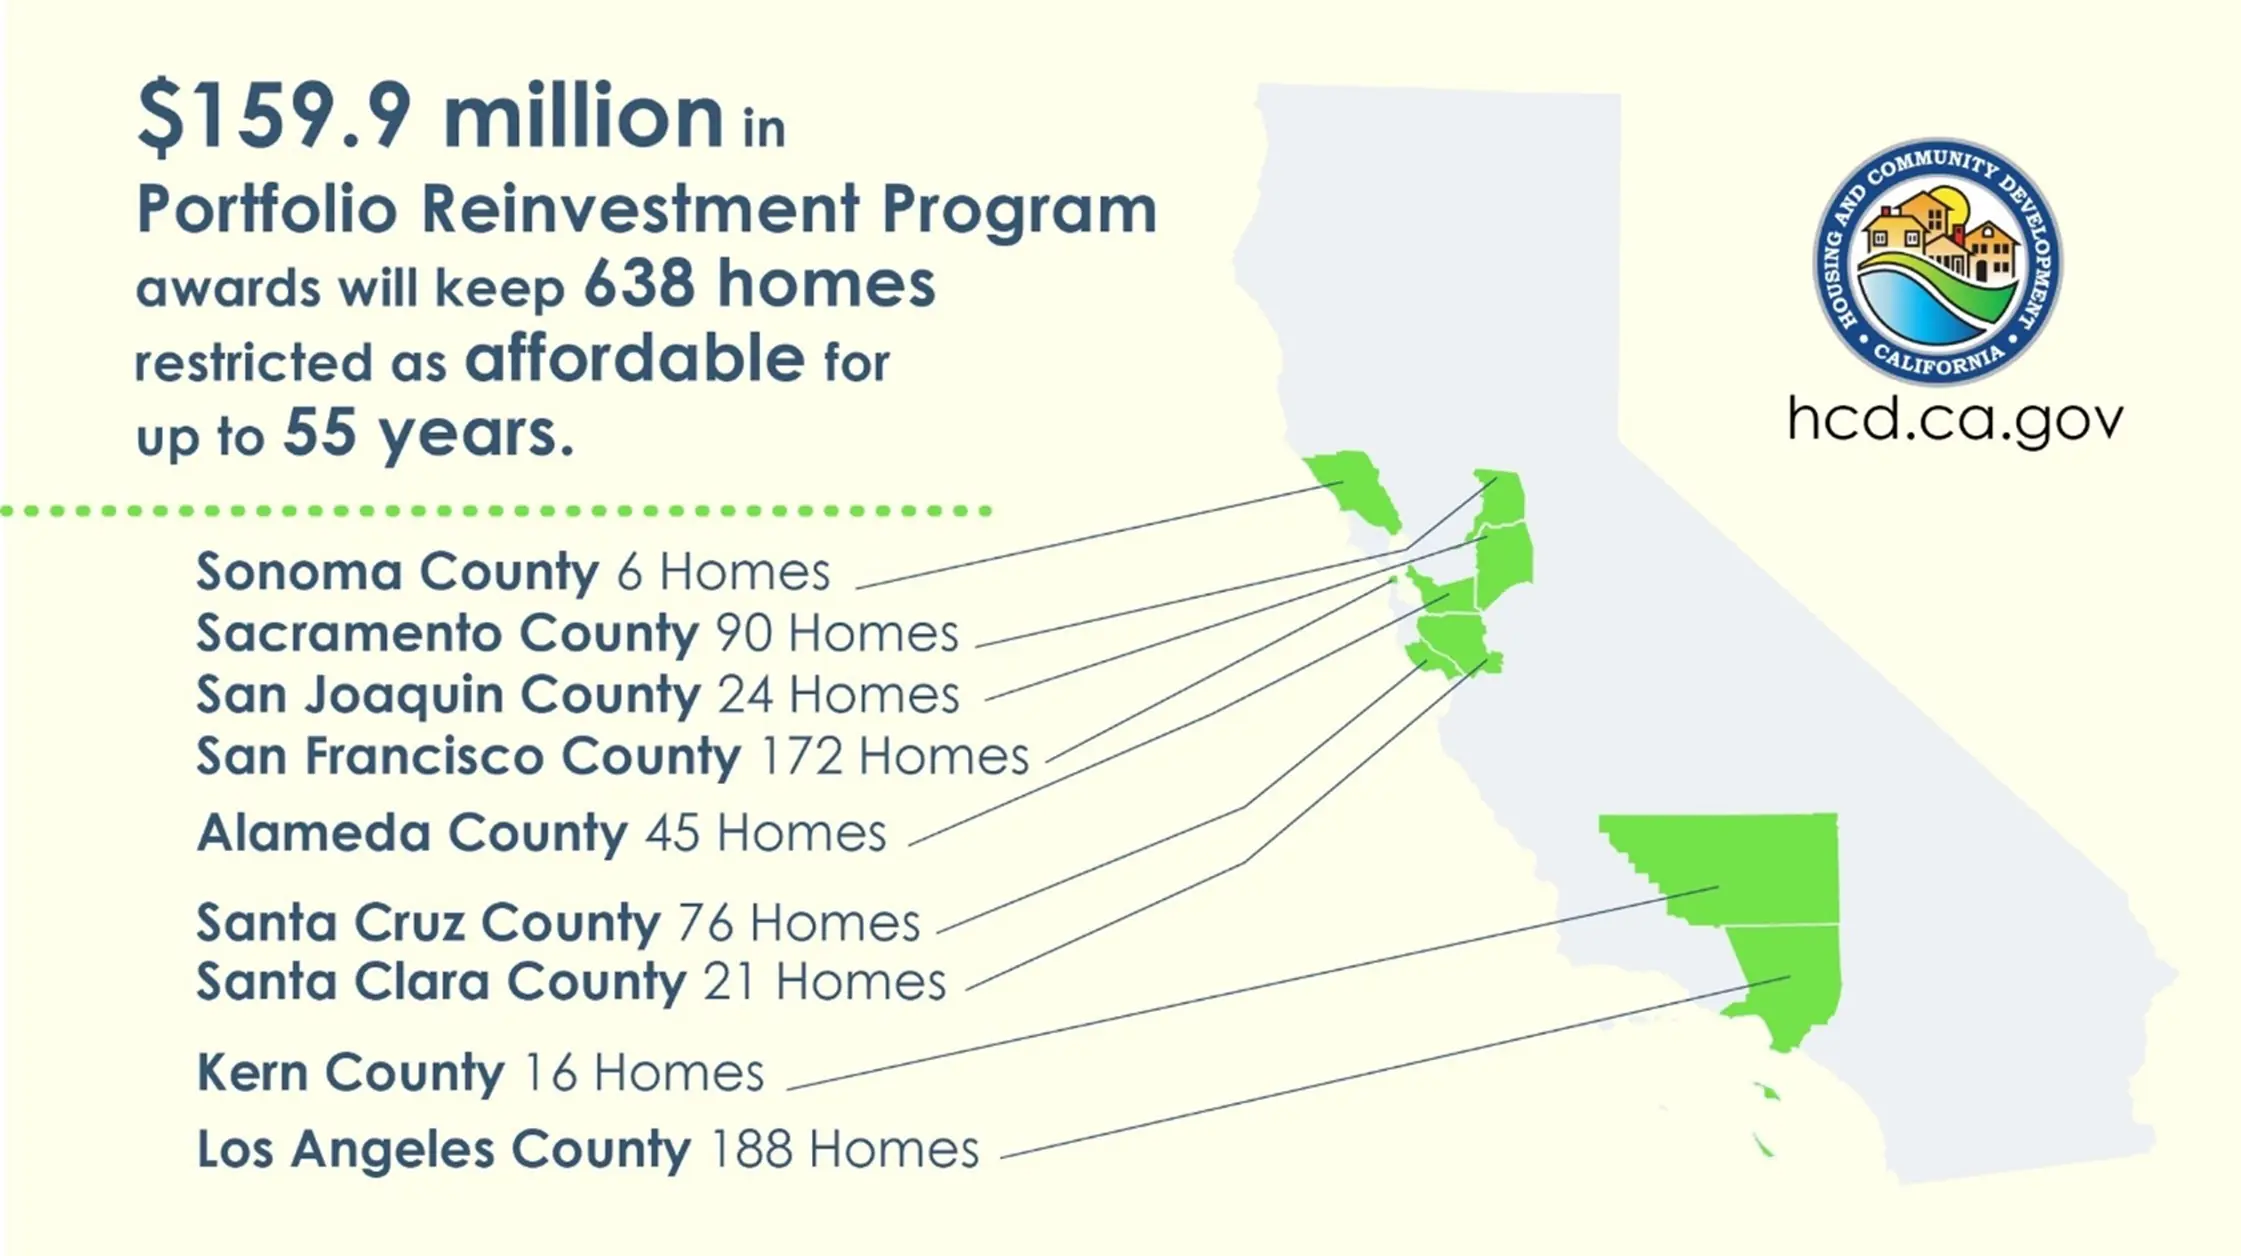 Map of California highlighting counties supported by Portfolio Reinvestment program. Text reads: 159.9 million in portfolio reinvestment program awards will keep 638 homes restricted as affordable for up to 55 years. Sonoma county 6 homes; Sacramento county 90 homes; San Joaquin county 24 homes; San Francisco County 172 homes; Alameda County 45 homes; Santa Cruz County 76 homes; Santa Clara County 21 homes; Kern County 16 homes; Los Angeles County 188 homes.